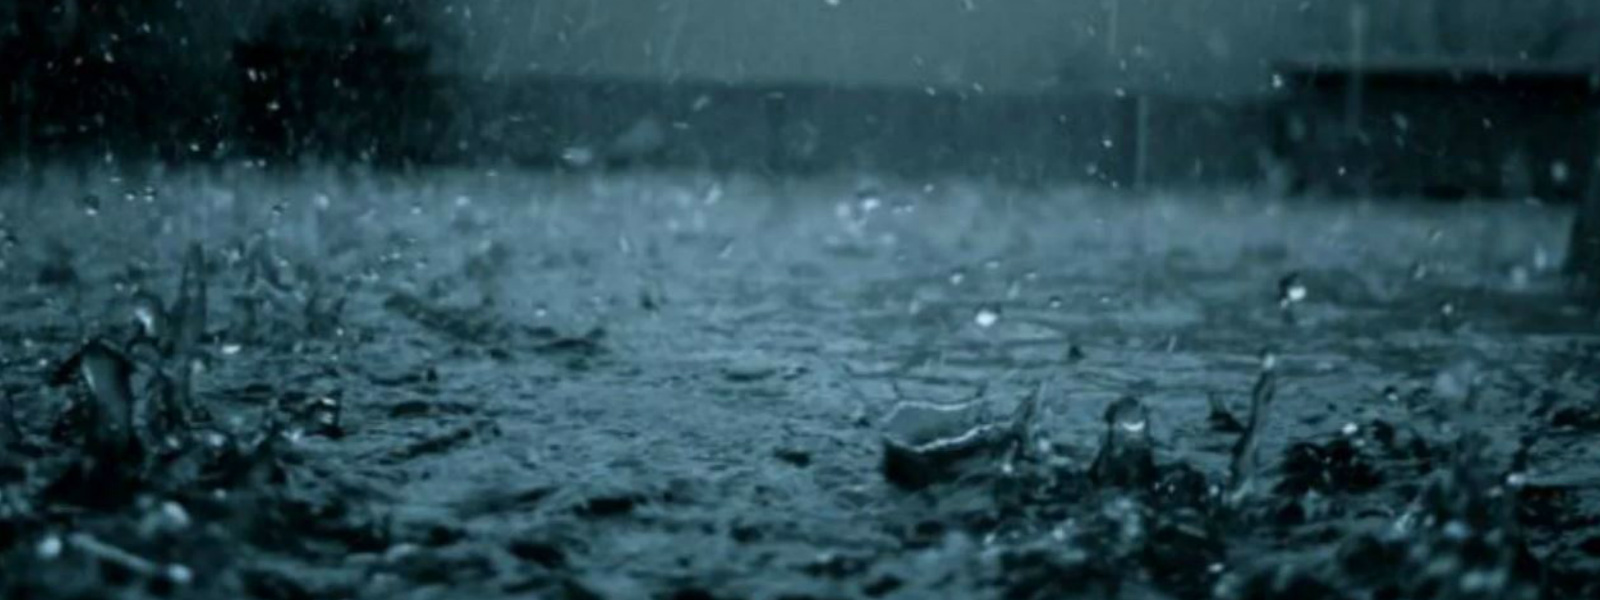 Heavy showers to ease after Christmas